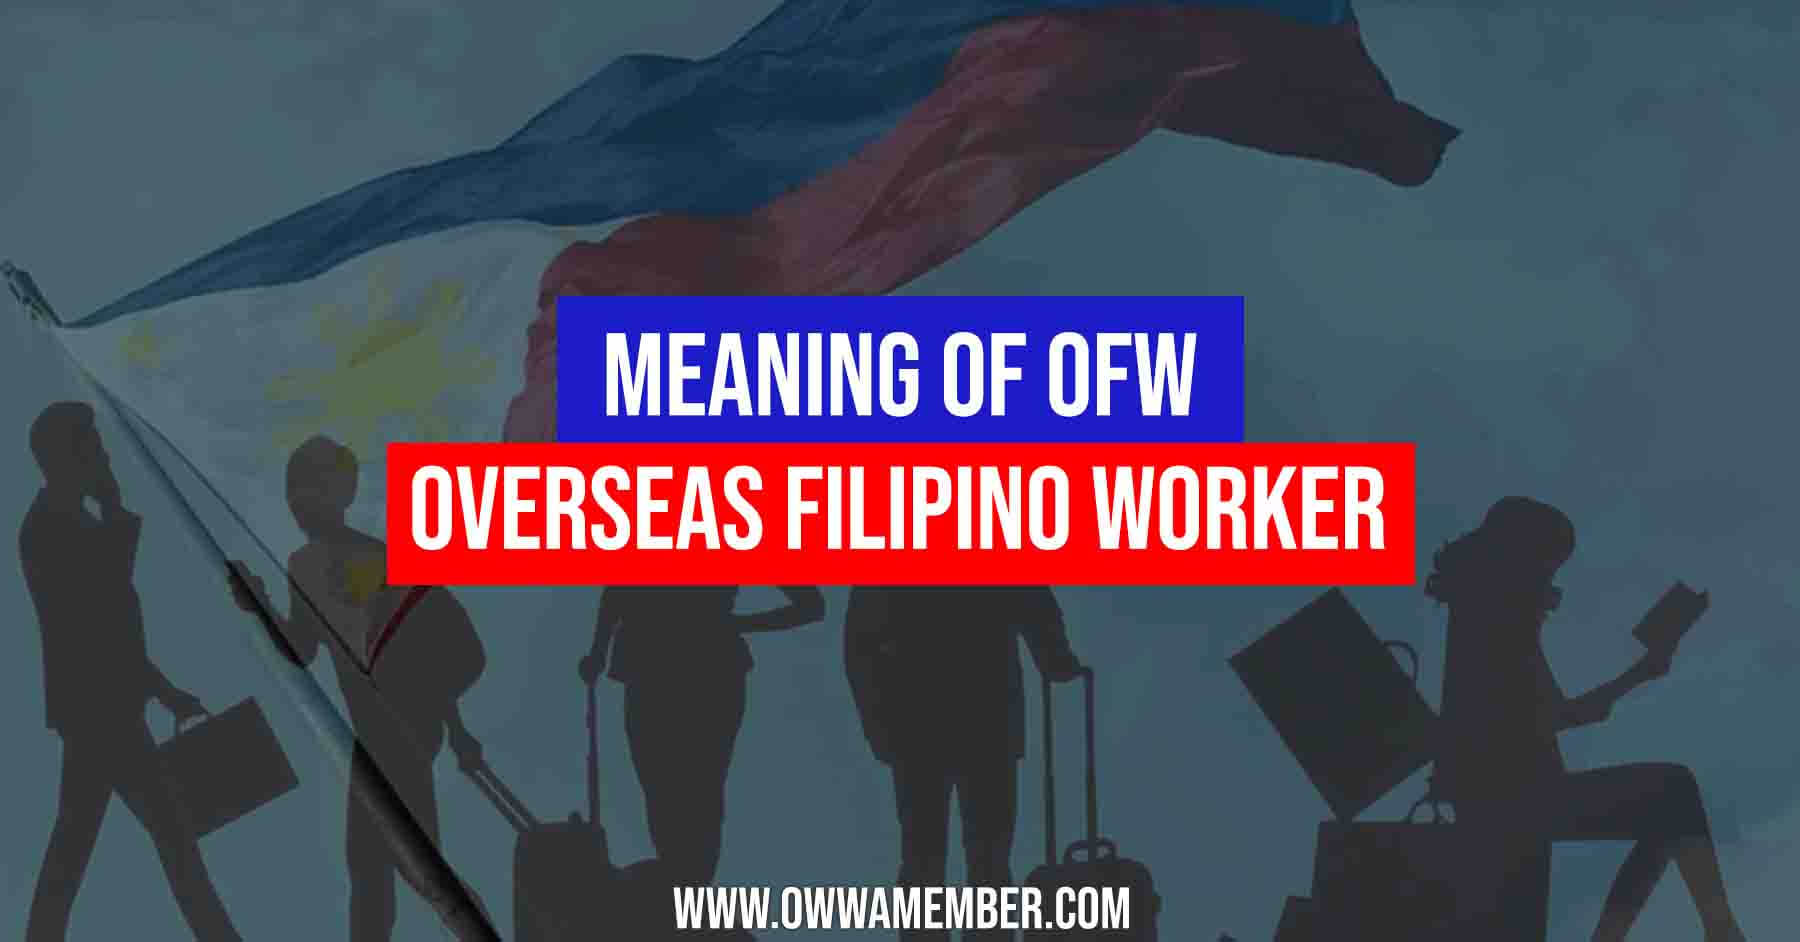 what is the meaning of ofw